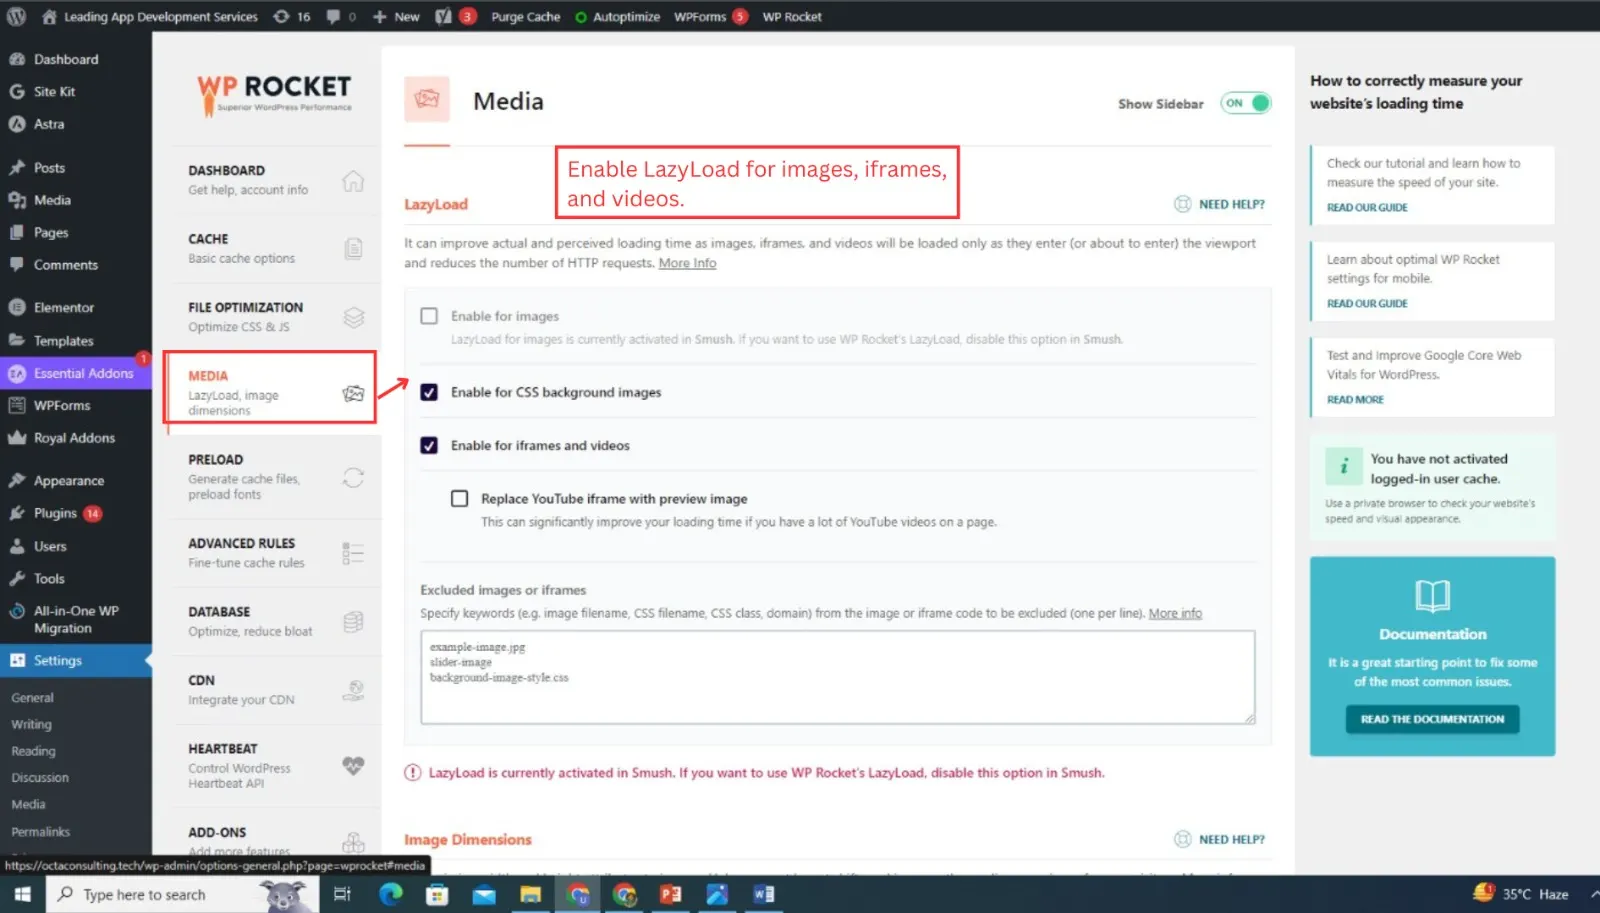 Settings page in WordPress with option to enable Lazy Load Image feature.